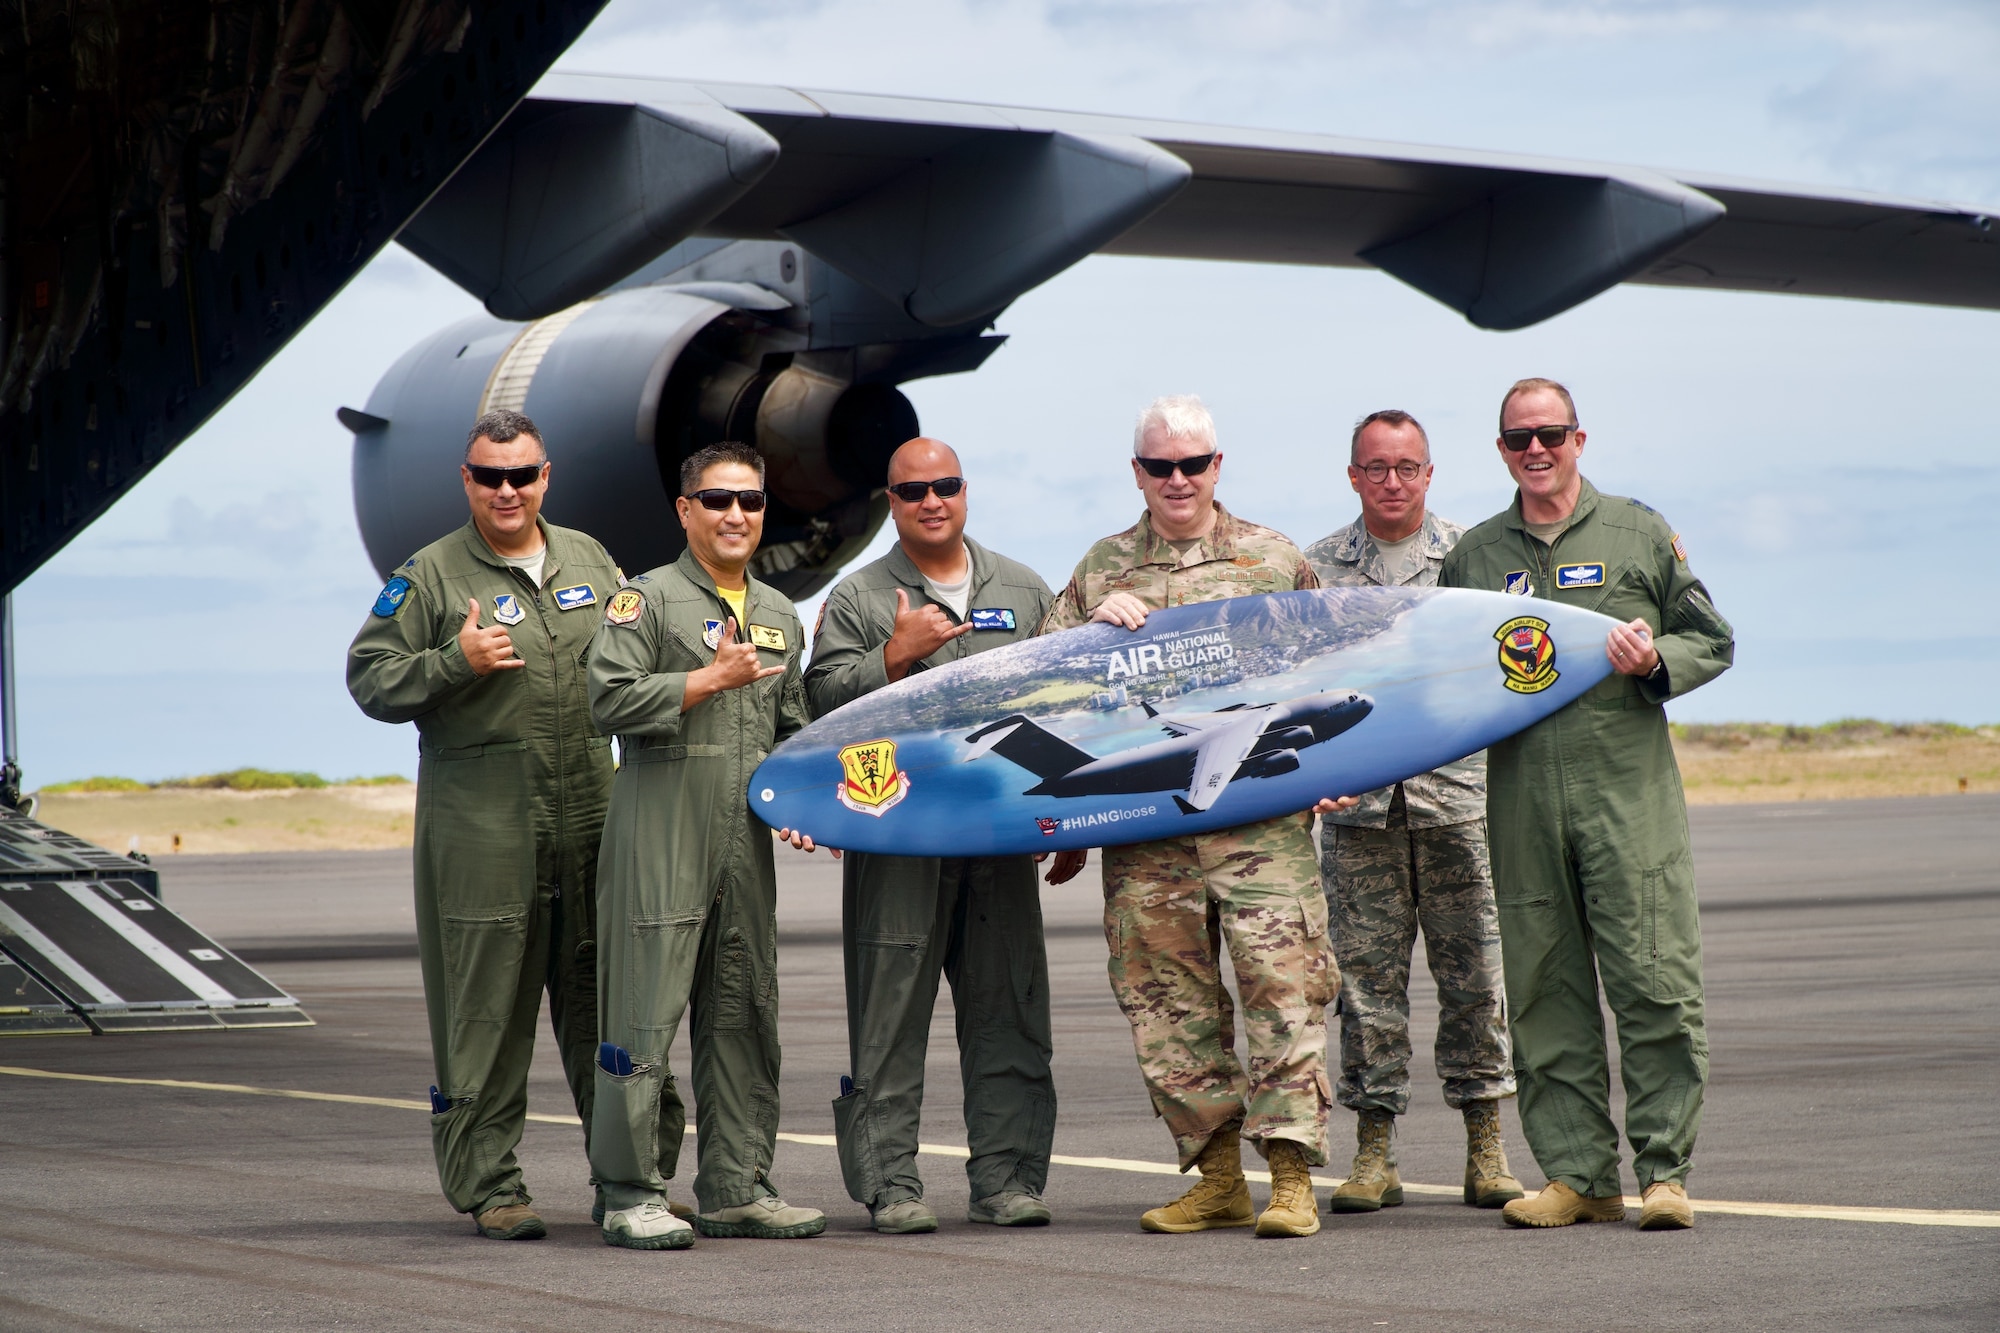 Left to right, Lt. Col. Jhonny Polanco, Deputy Director ANG Forces, HQ PACAF, Col. James Shigekane, Vice Commander, 154th Wing, Col. Phillip Mallory, Commander, 298th Air Defense Group, Lt. Gen. L. Scott Rice, Director of the Air National Guard, Col. Dann Carlson, Director A5/8, HQ HIANG, Maj. Gen. David Burgy, Air National Guard Assistant to COMPACAF poses for a photo with the 204th Airlift Squadron surfboard on June 21, 2019 at Barking Sands, Kauai.